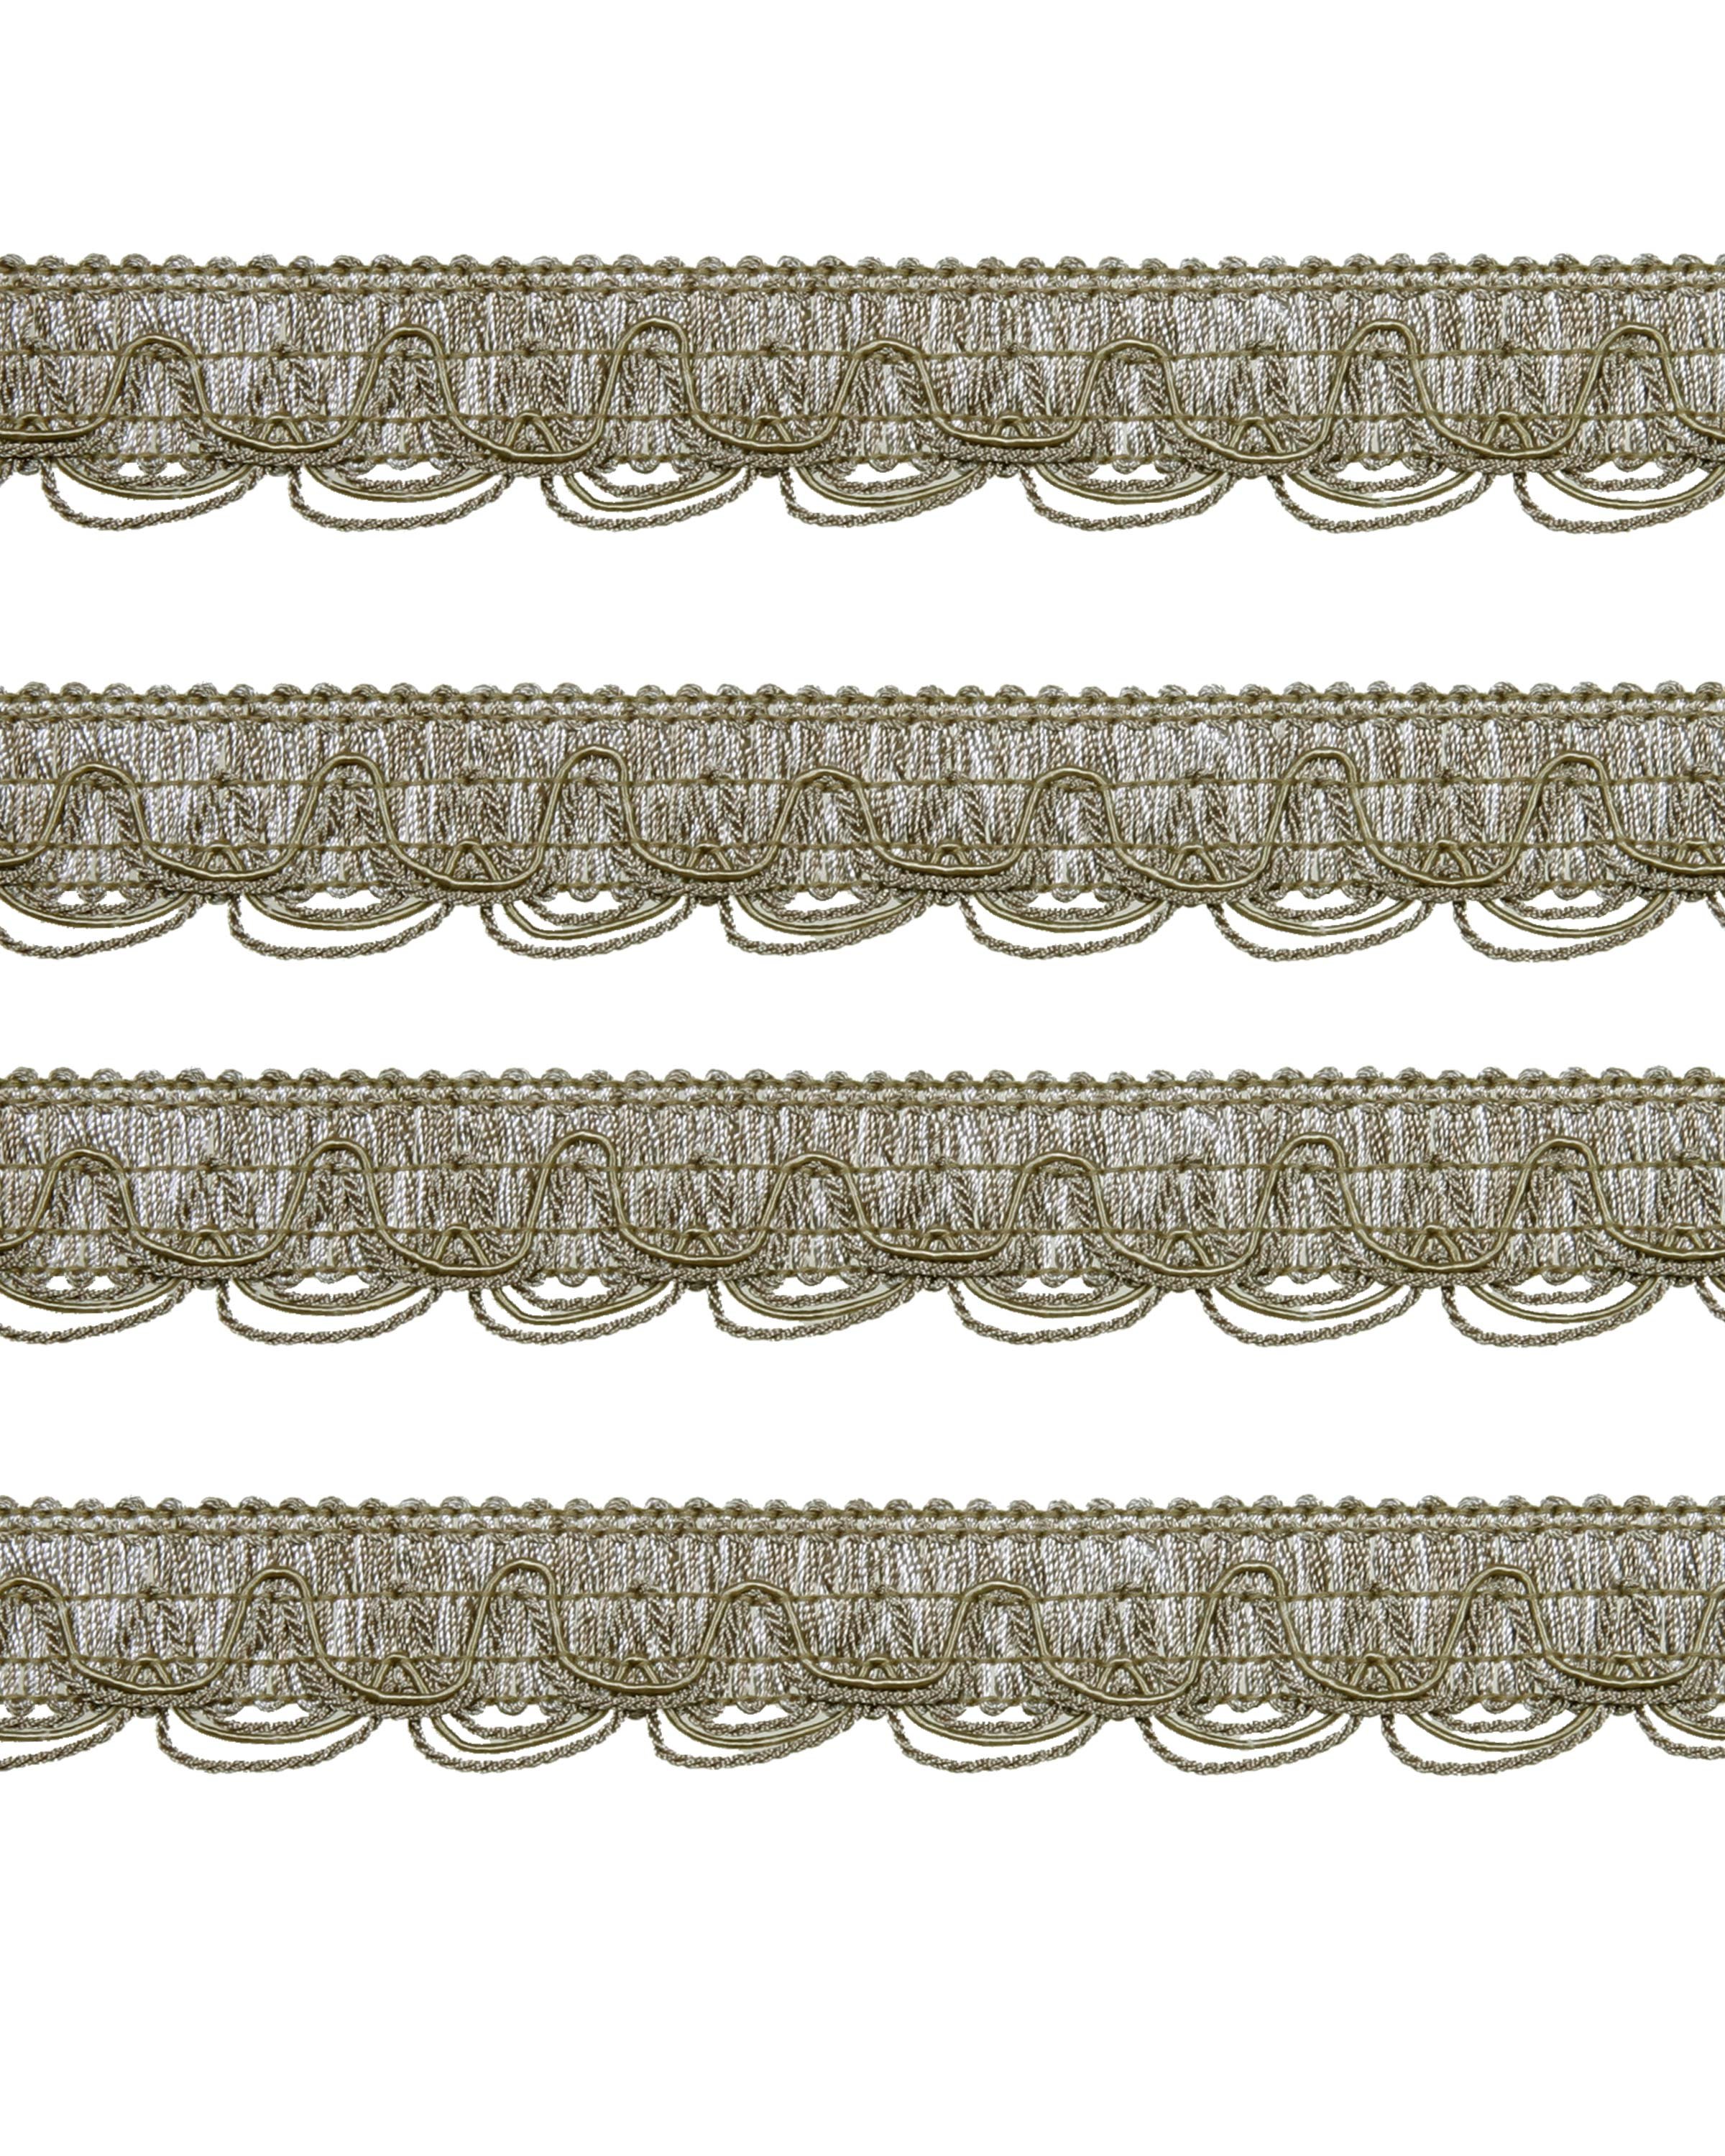 Scalloped Looped Braid - Taupe 30mm Price is for 5 metres